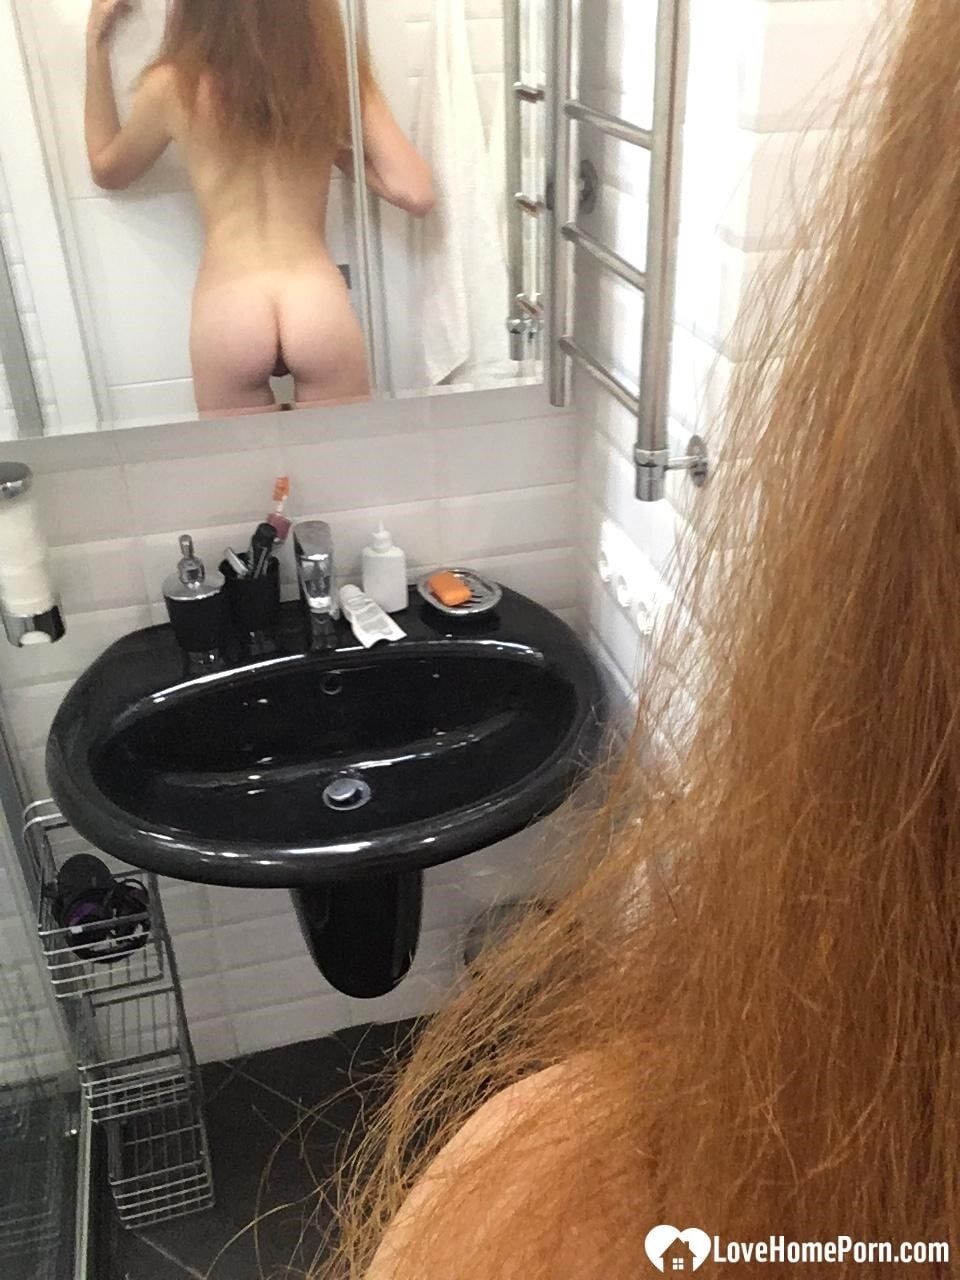 Messy redhead takes nudes in a public shower #23